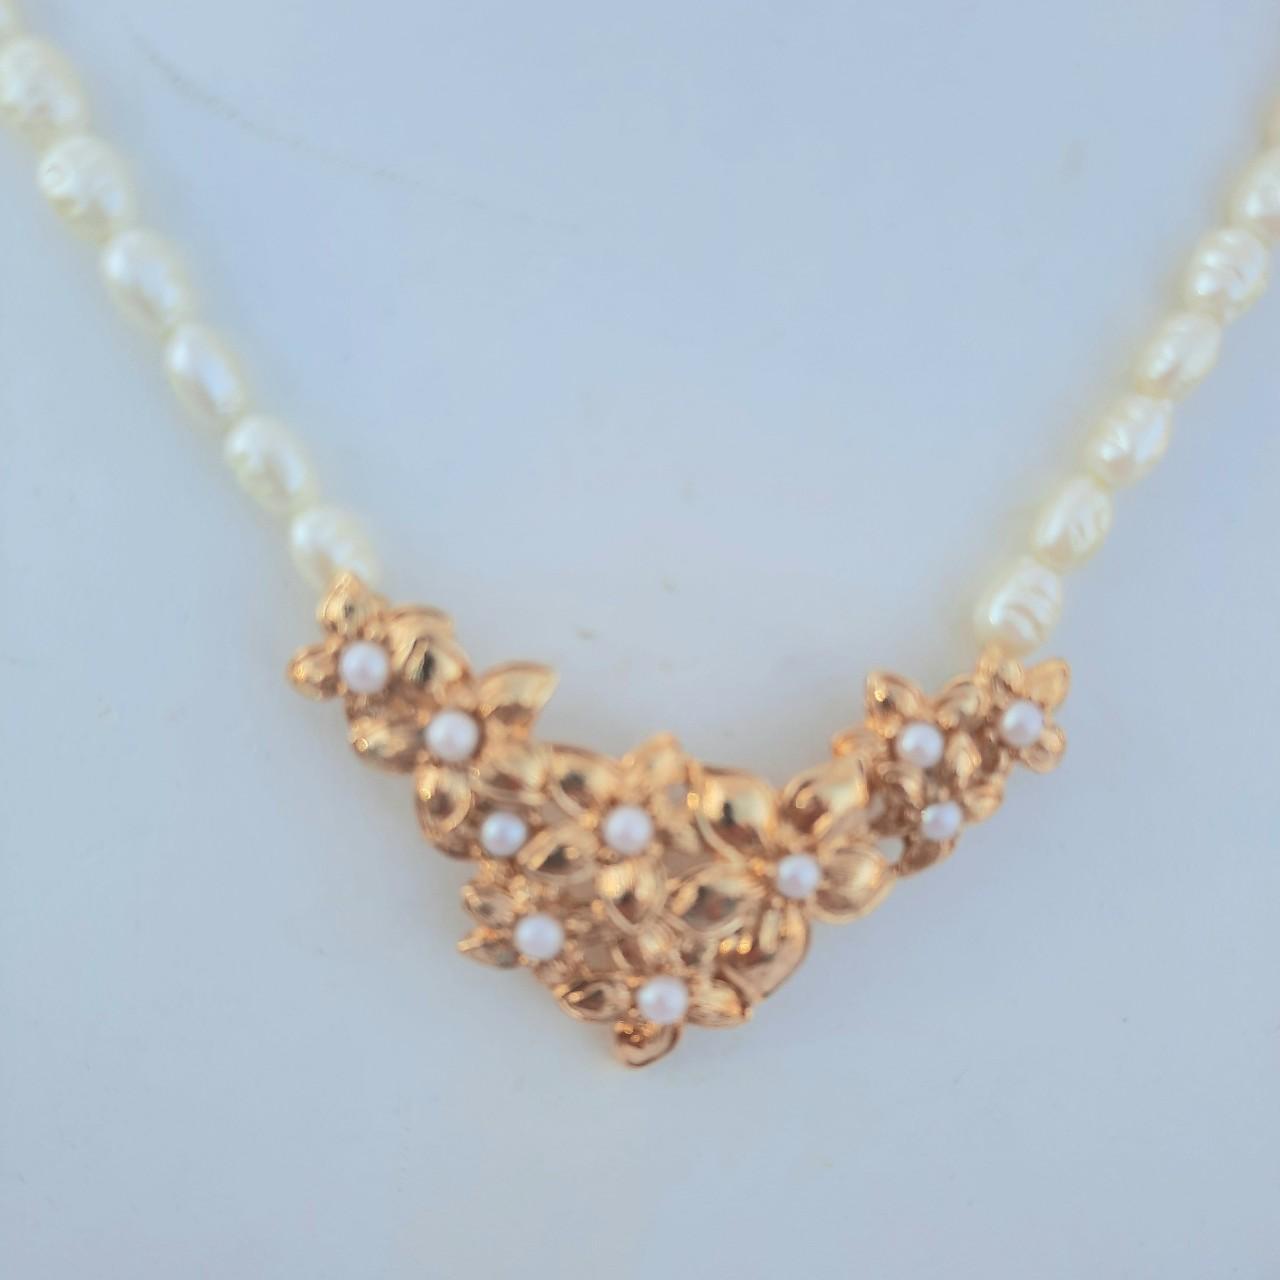 Lot - PEARL NECKLACE WITH MABE PEARL ENHANCER PENDANT